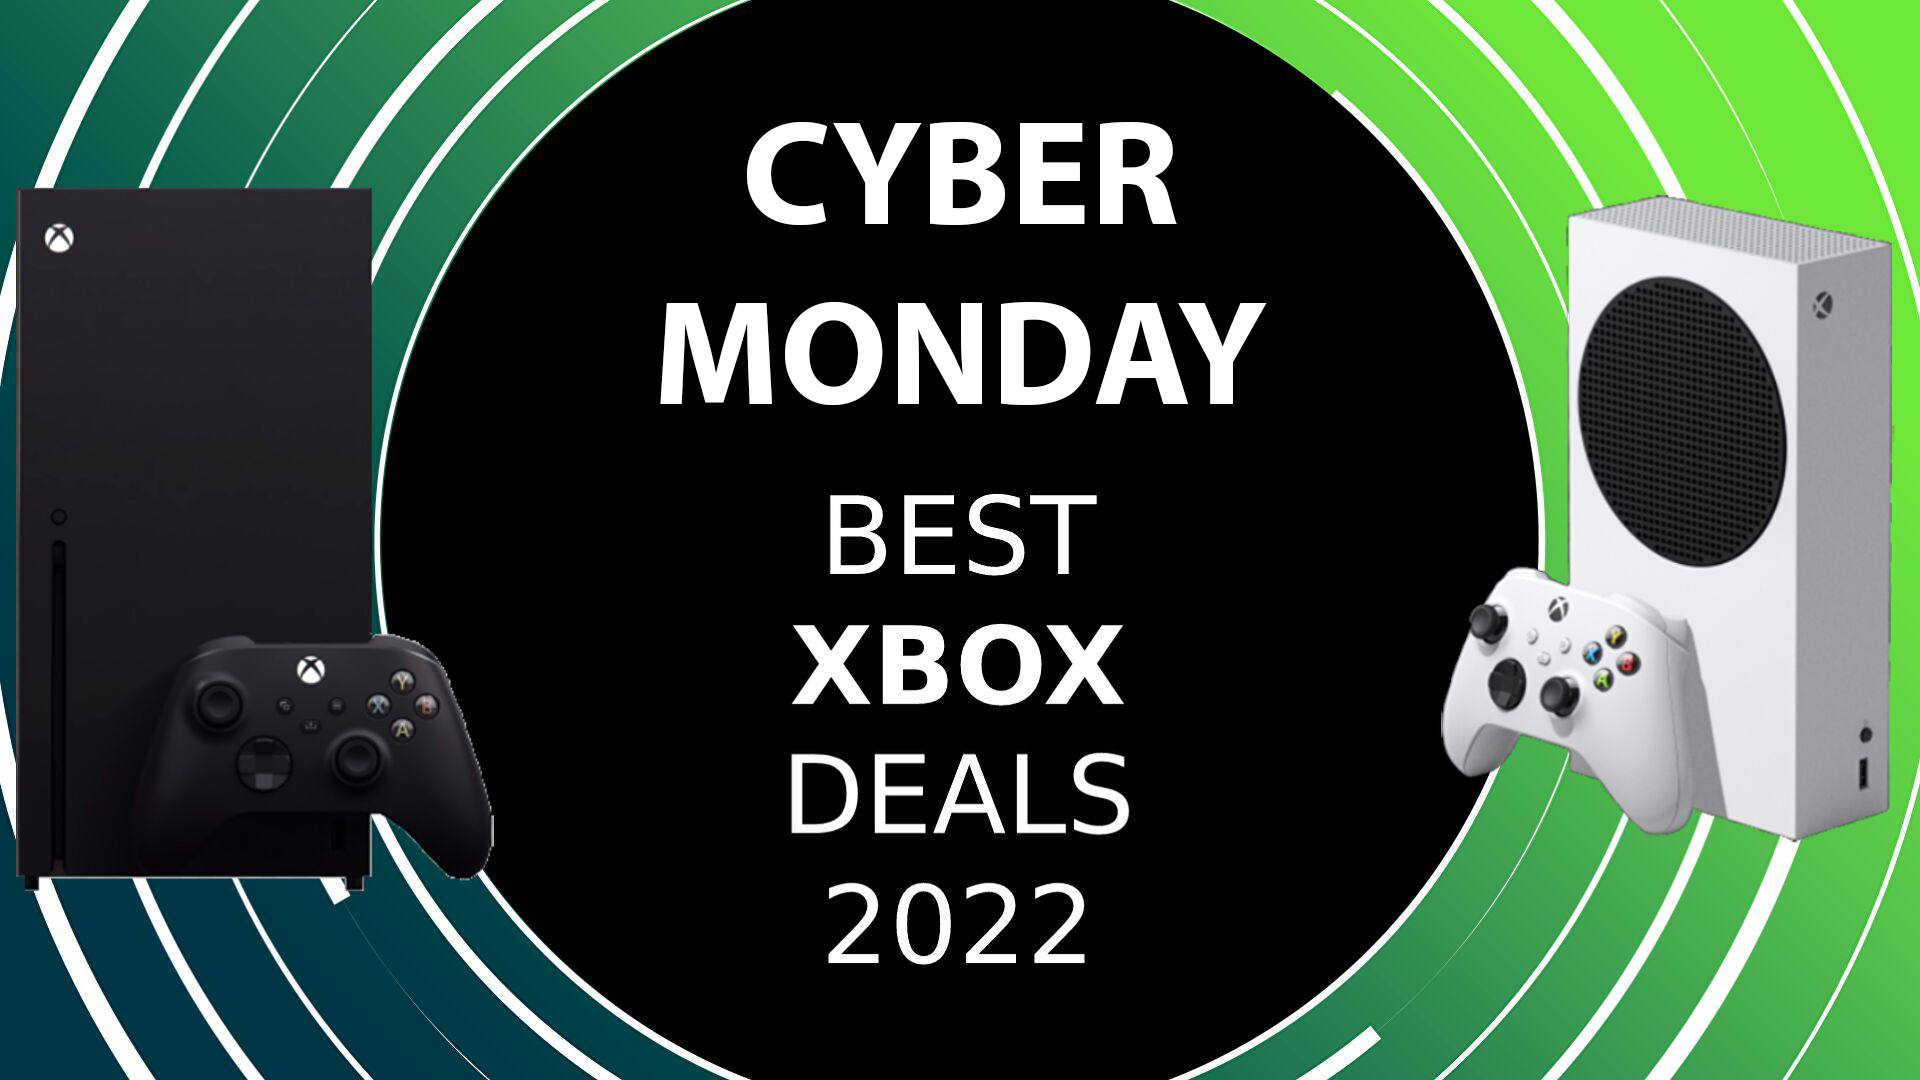 Image for Cyber Monday Xbox deals 2022: best offers and discounts